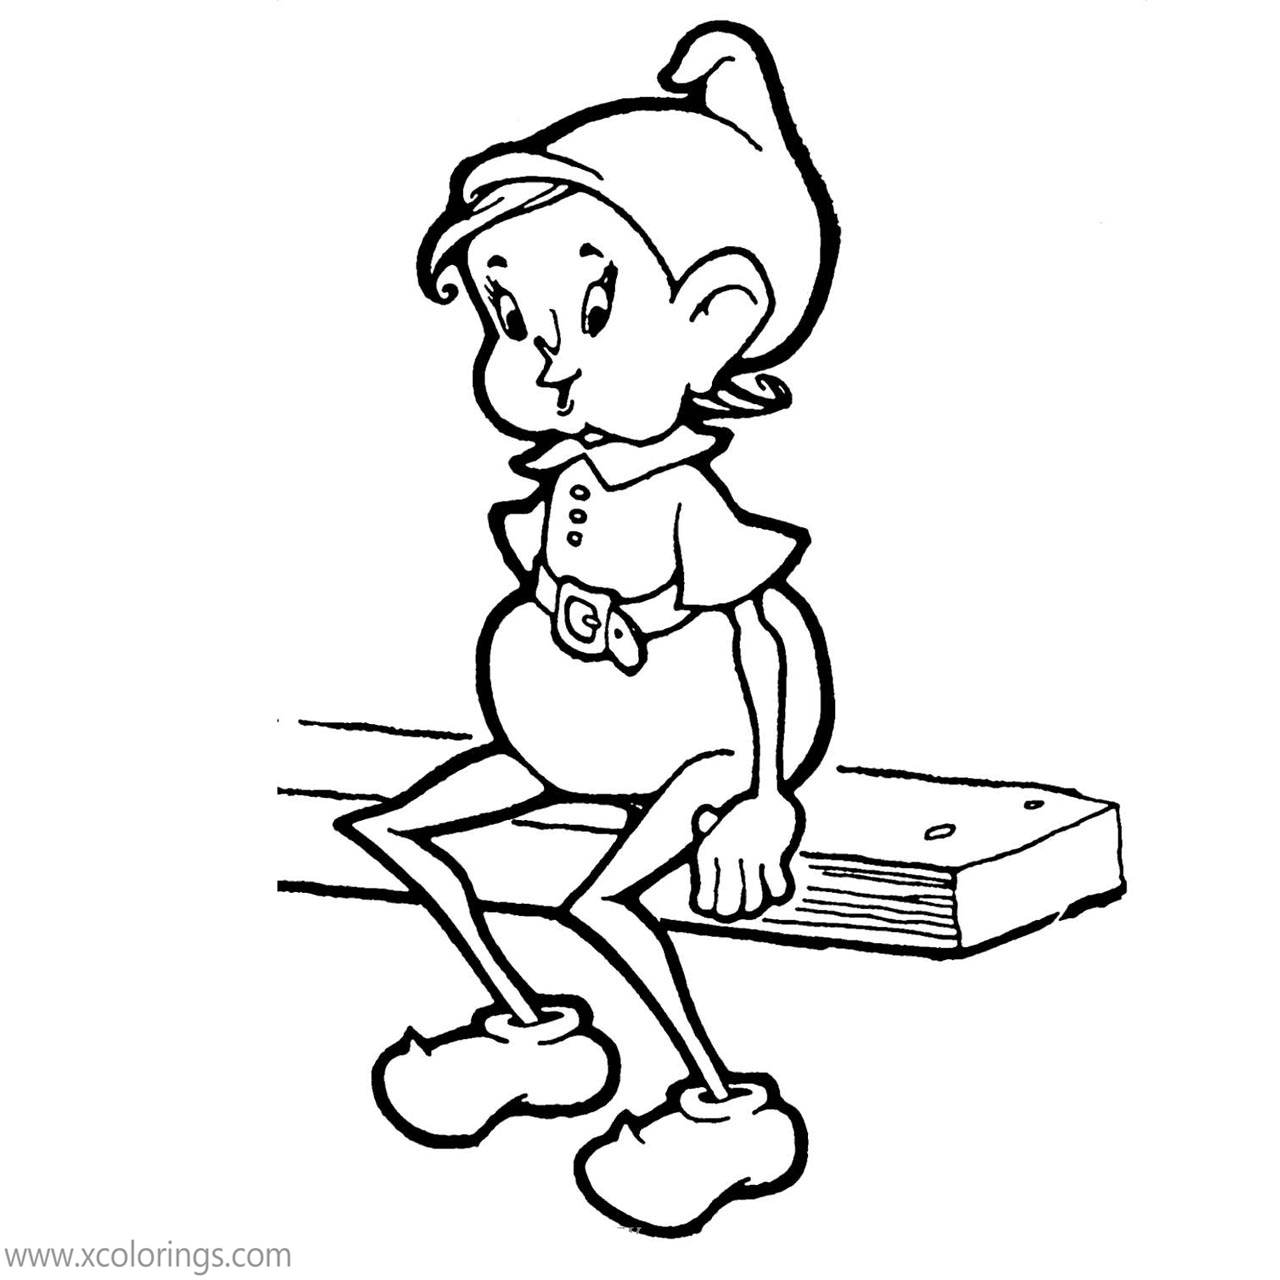 Free Character from Elf On The Shelf Coloring Pages printable